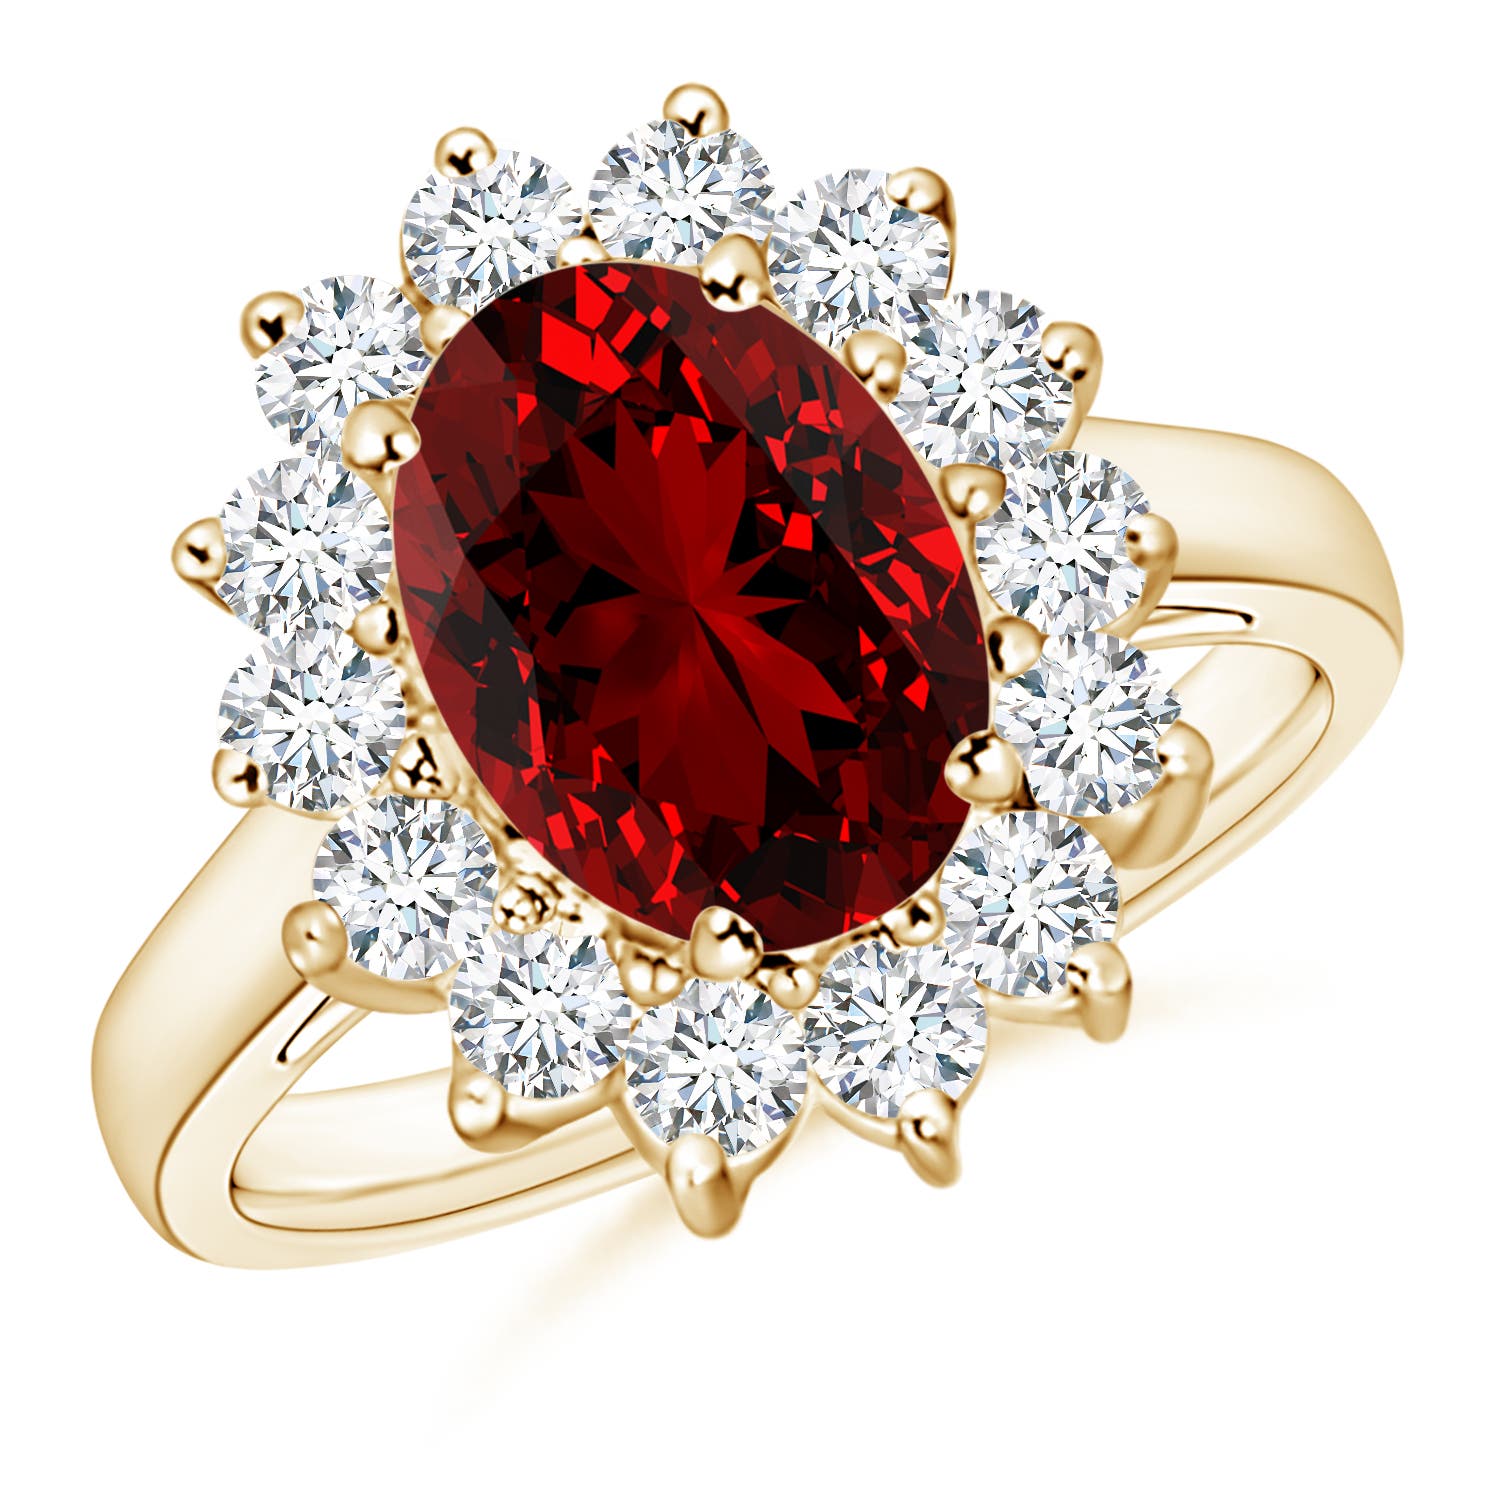 Square Halo Diamond Affordable Engagement Ring With Ruby In 14K White Gold  | Fascinating Diamonds